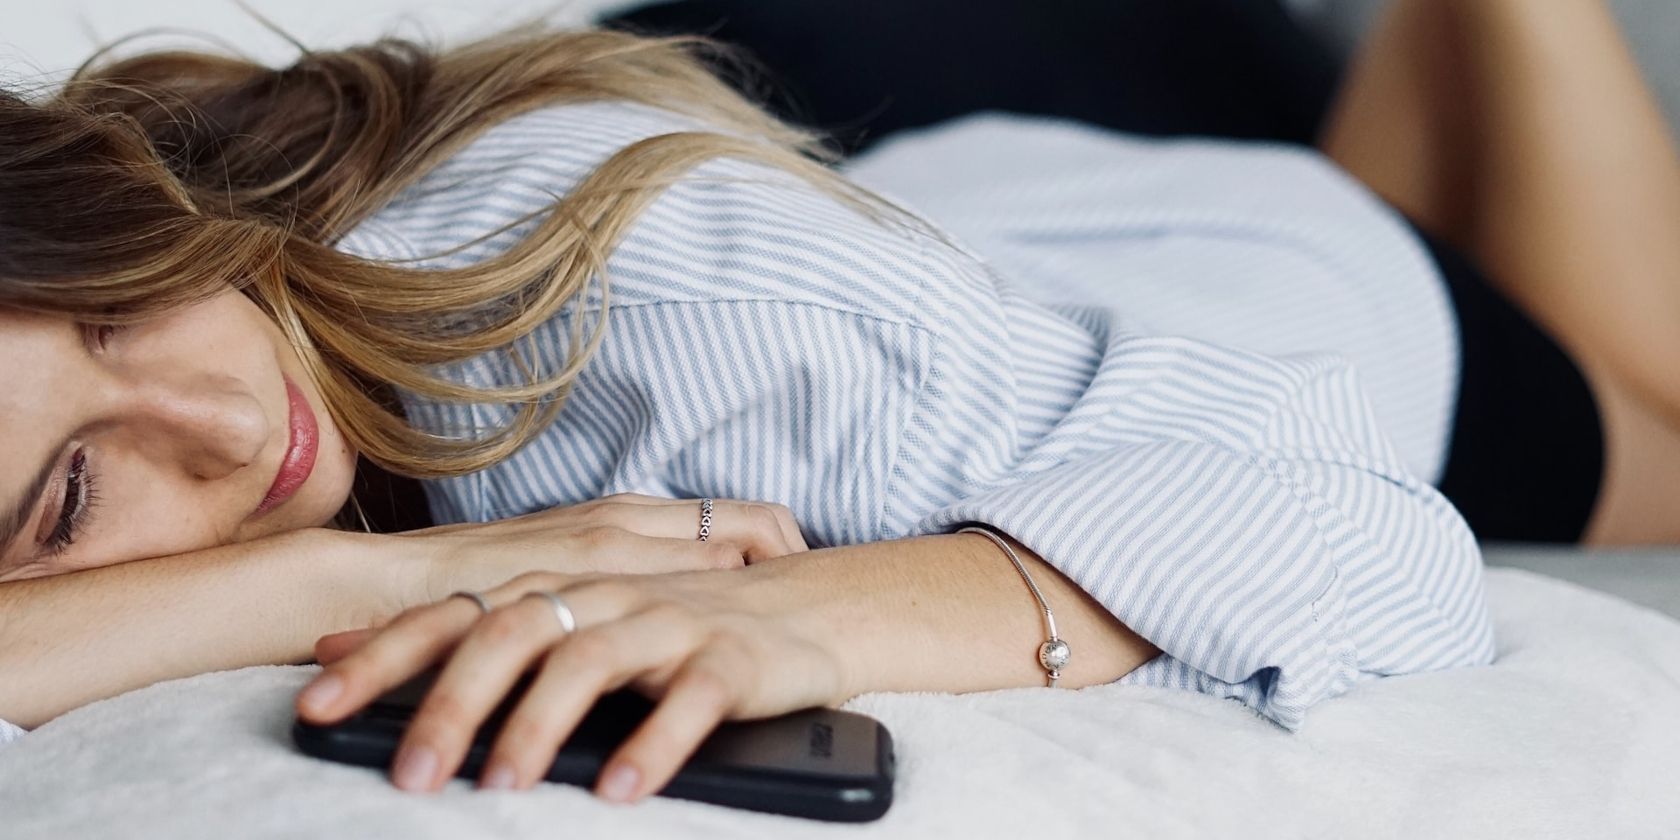 Having trouble falling asleep? Here are 4 ways to help you nod off, Everyday